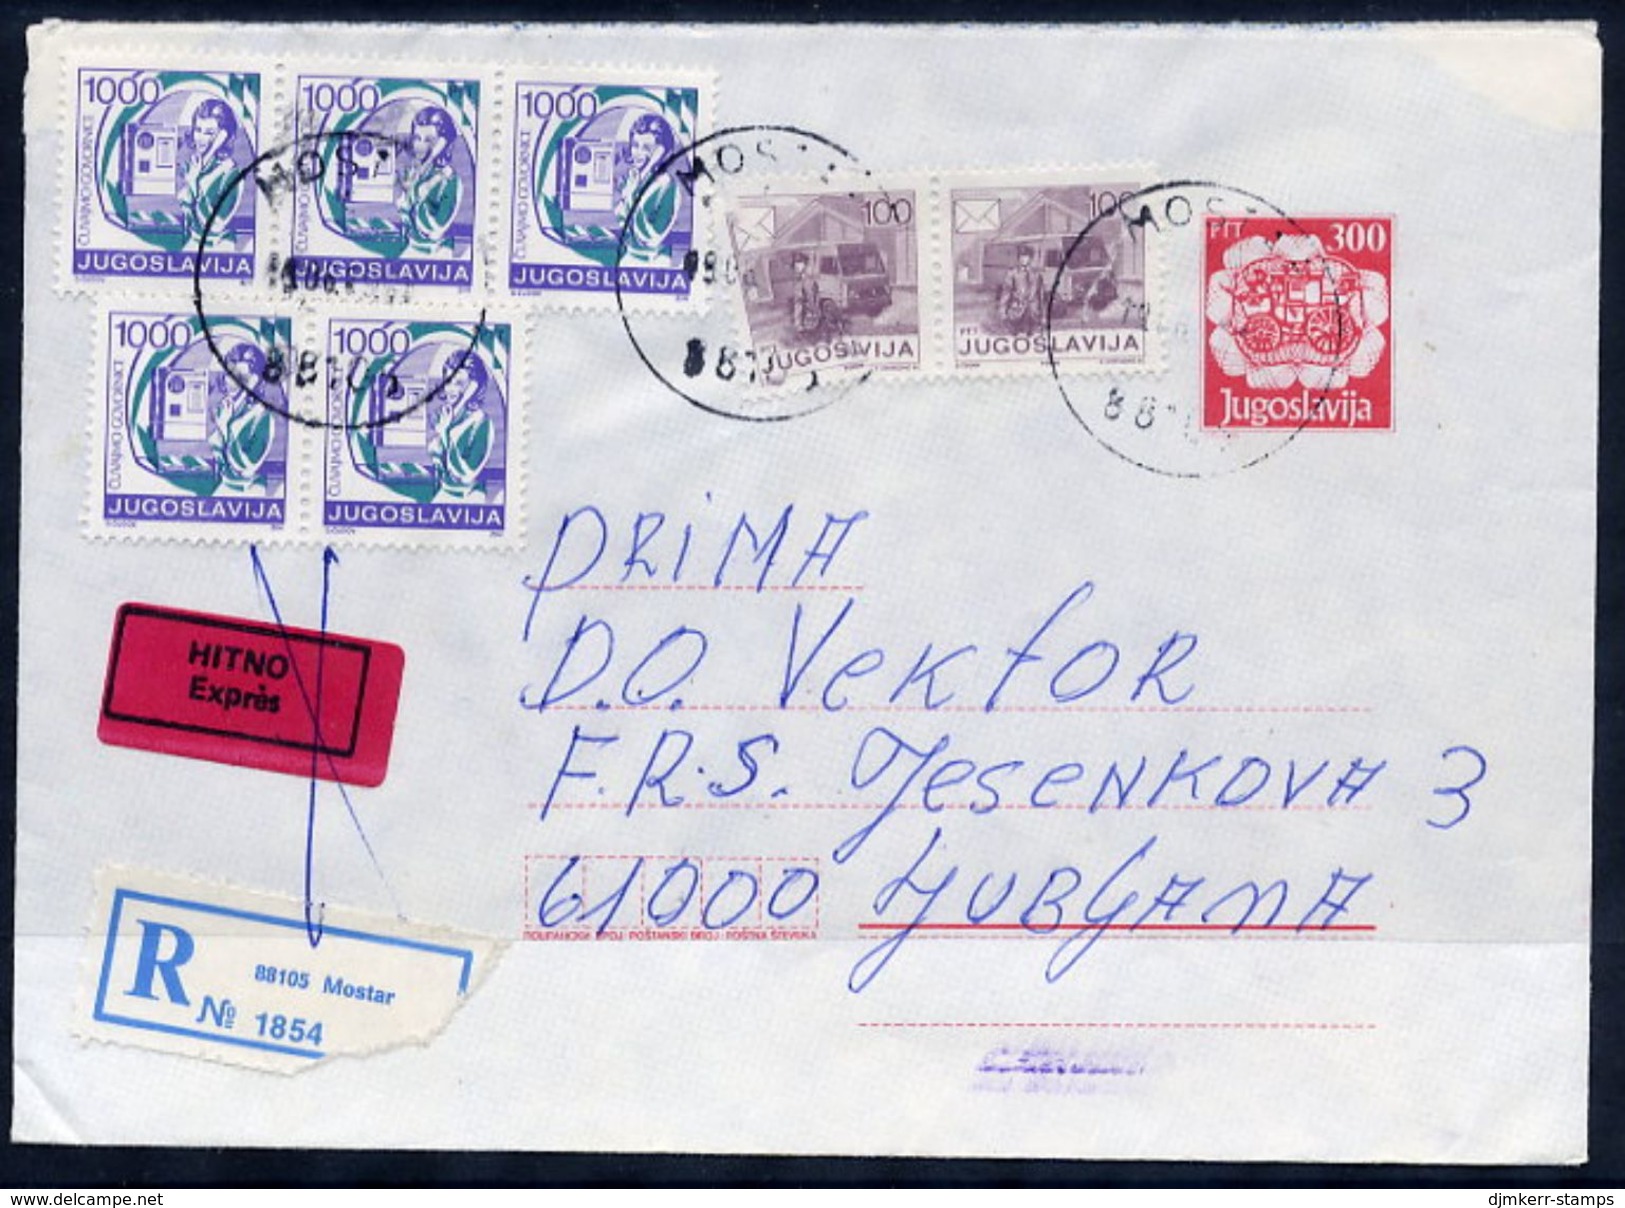 YUGOSLAVIA 1989 Mailcoach 300 D.envelope Used With Additional Franking And Express Label (Croatian).  Michel U89 - Entiers Postaux